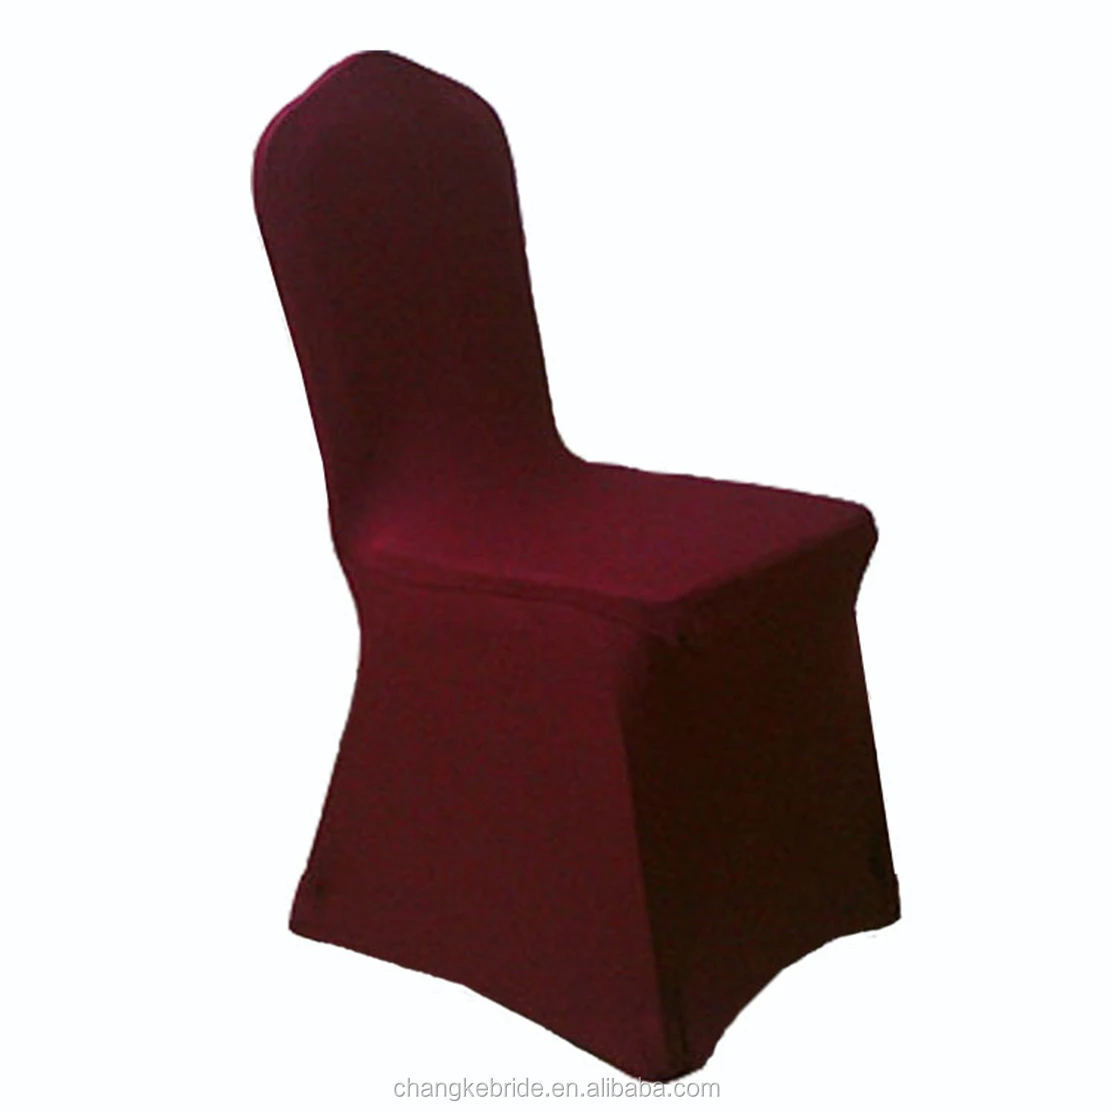 Spandex Plain Lycra Wedding Chair Cover For Banquet &amp; Ceremony With Elasticity Many Colors Available